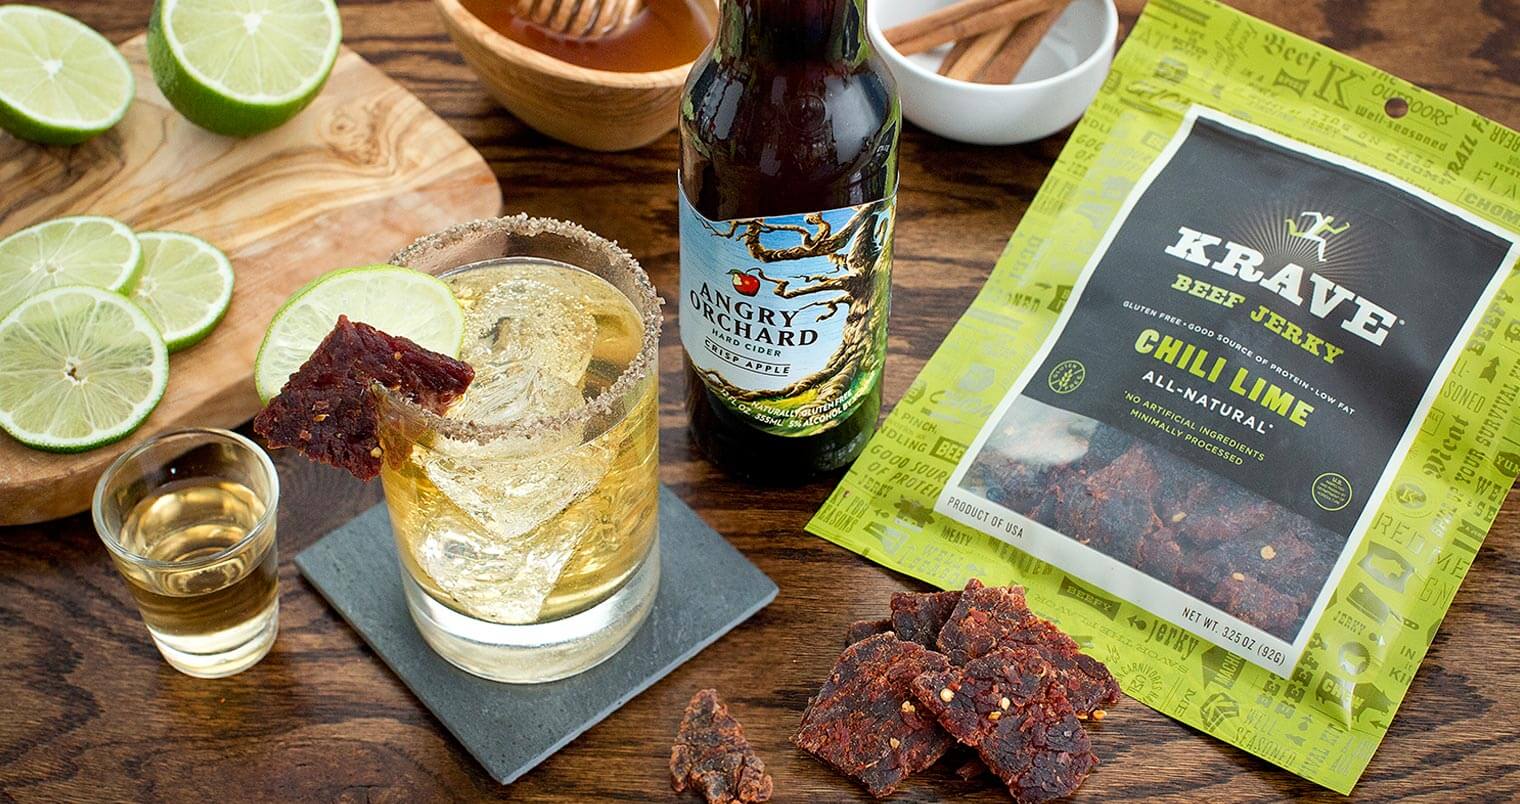 National Jerky Day Cocktail - Apple Meets Chili Lime, featured image